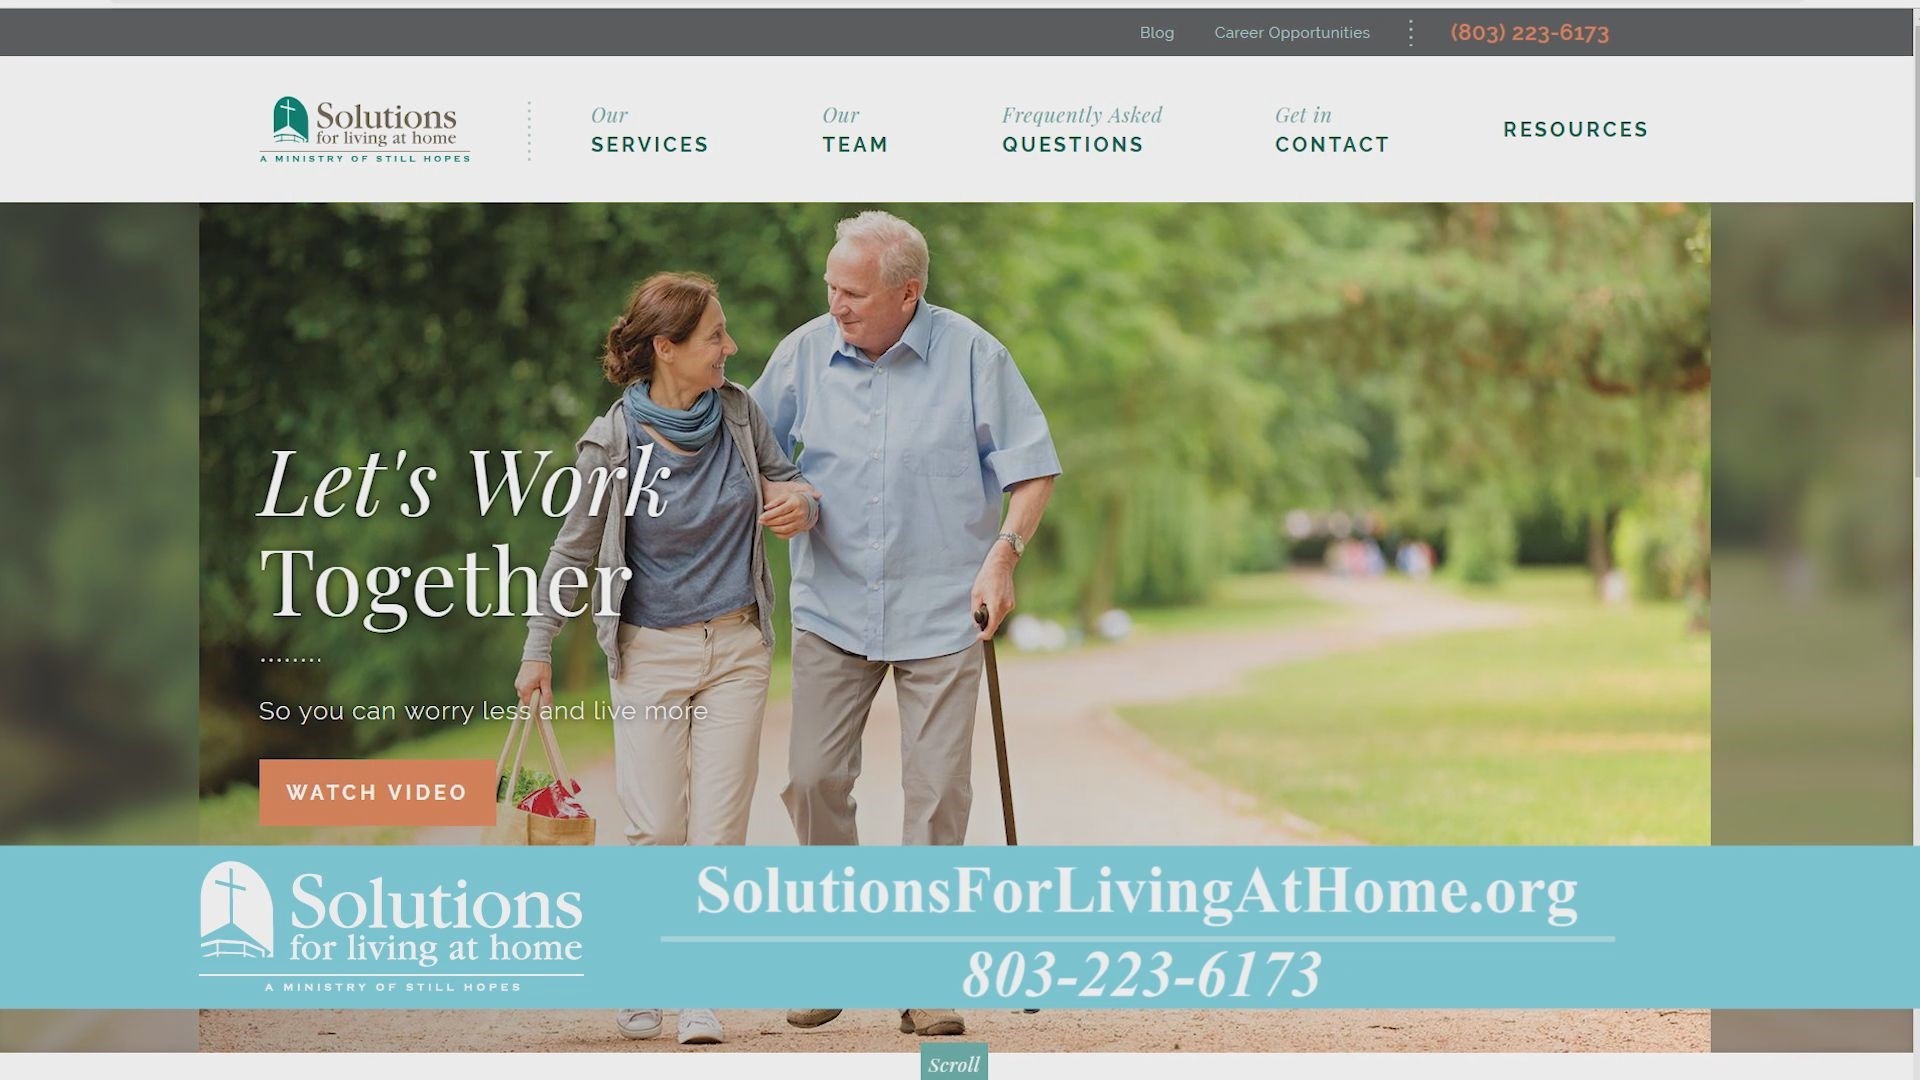 Whether your needs are simple or challenging, Solutions for Living at Home can help you live a happier life by providing high quality assistance and care to individuals of all ages and varying circumstances. We are a non-profit, community-based ministry that strives to exceed the needs and expectations of those we serve, while embracing the Still Hopes’ values.